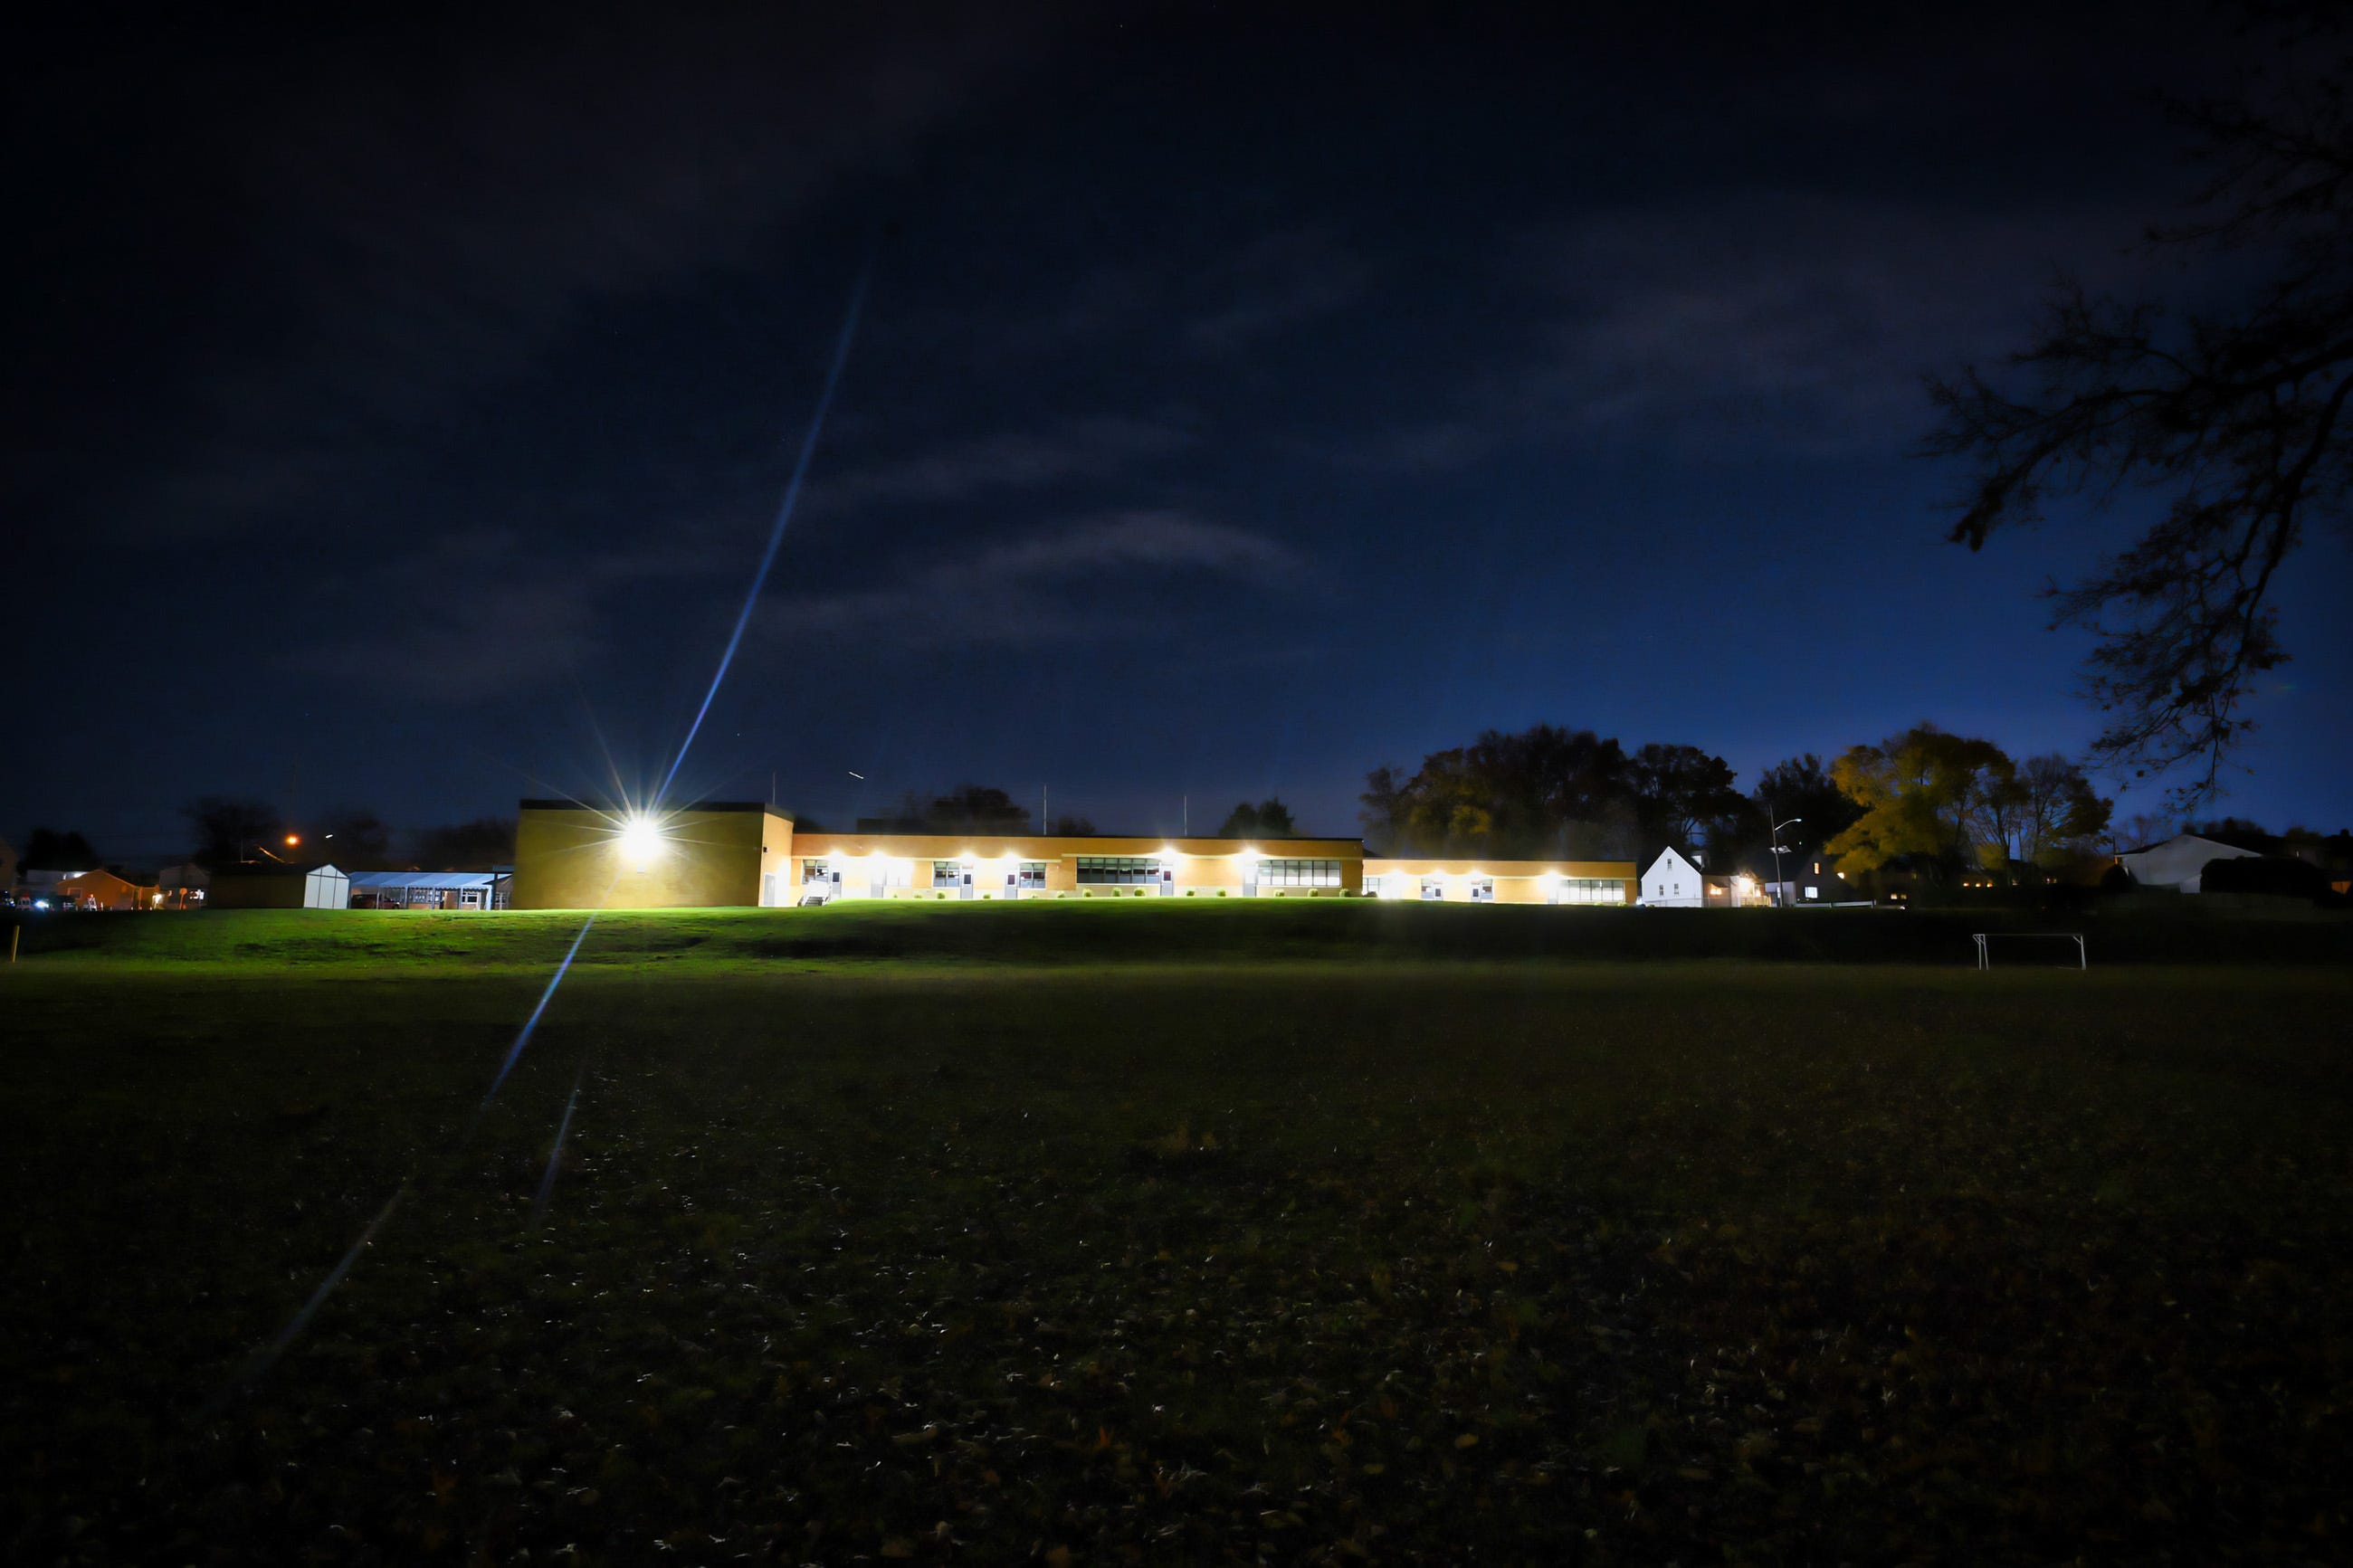 Westmoreland Elementary School is glinting under the night sky on the top of the hill  in Fair Lawn on 11/22/21.